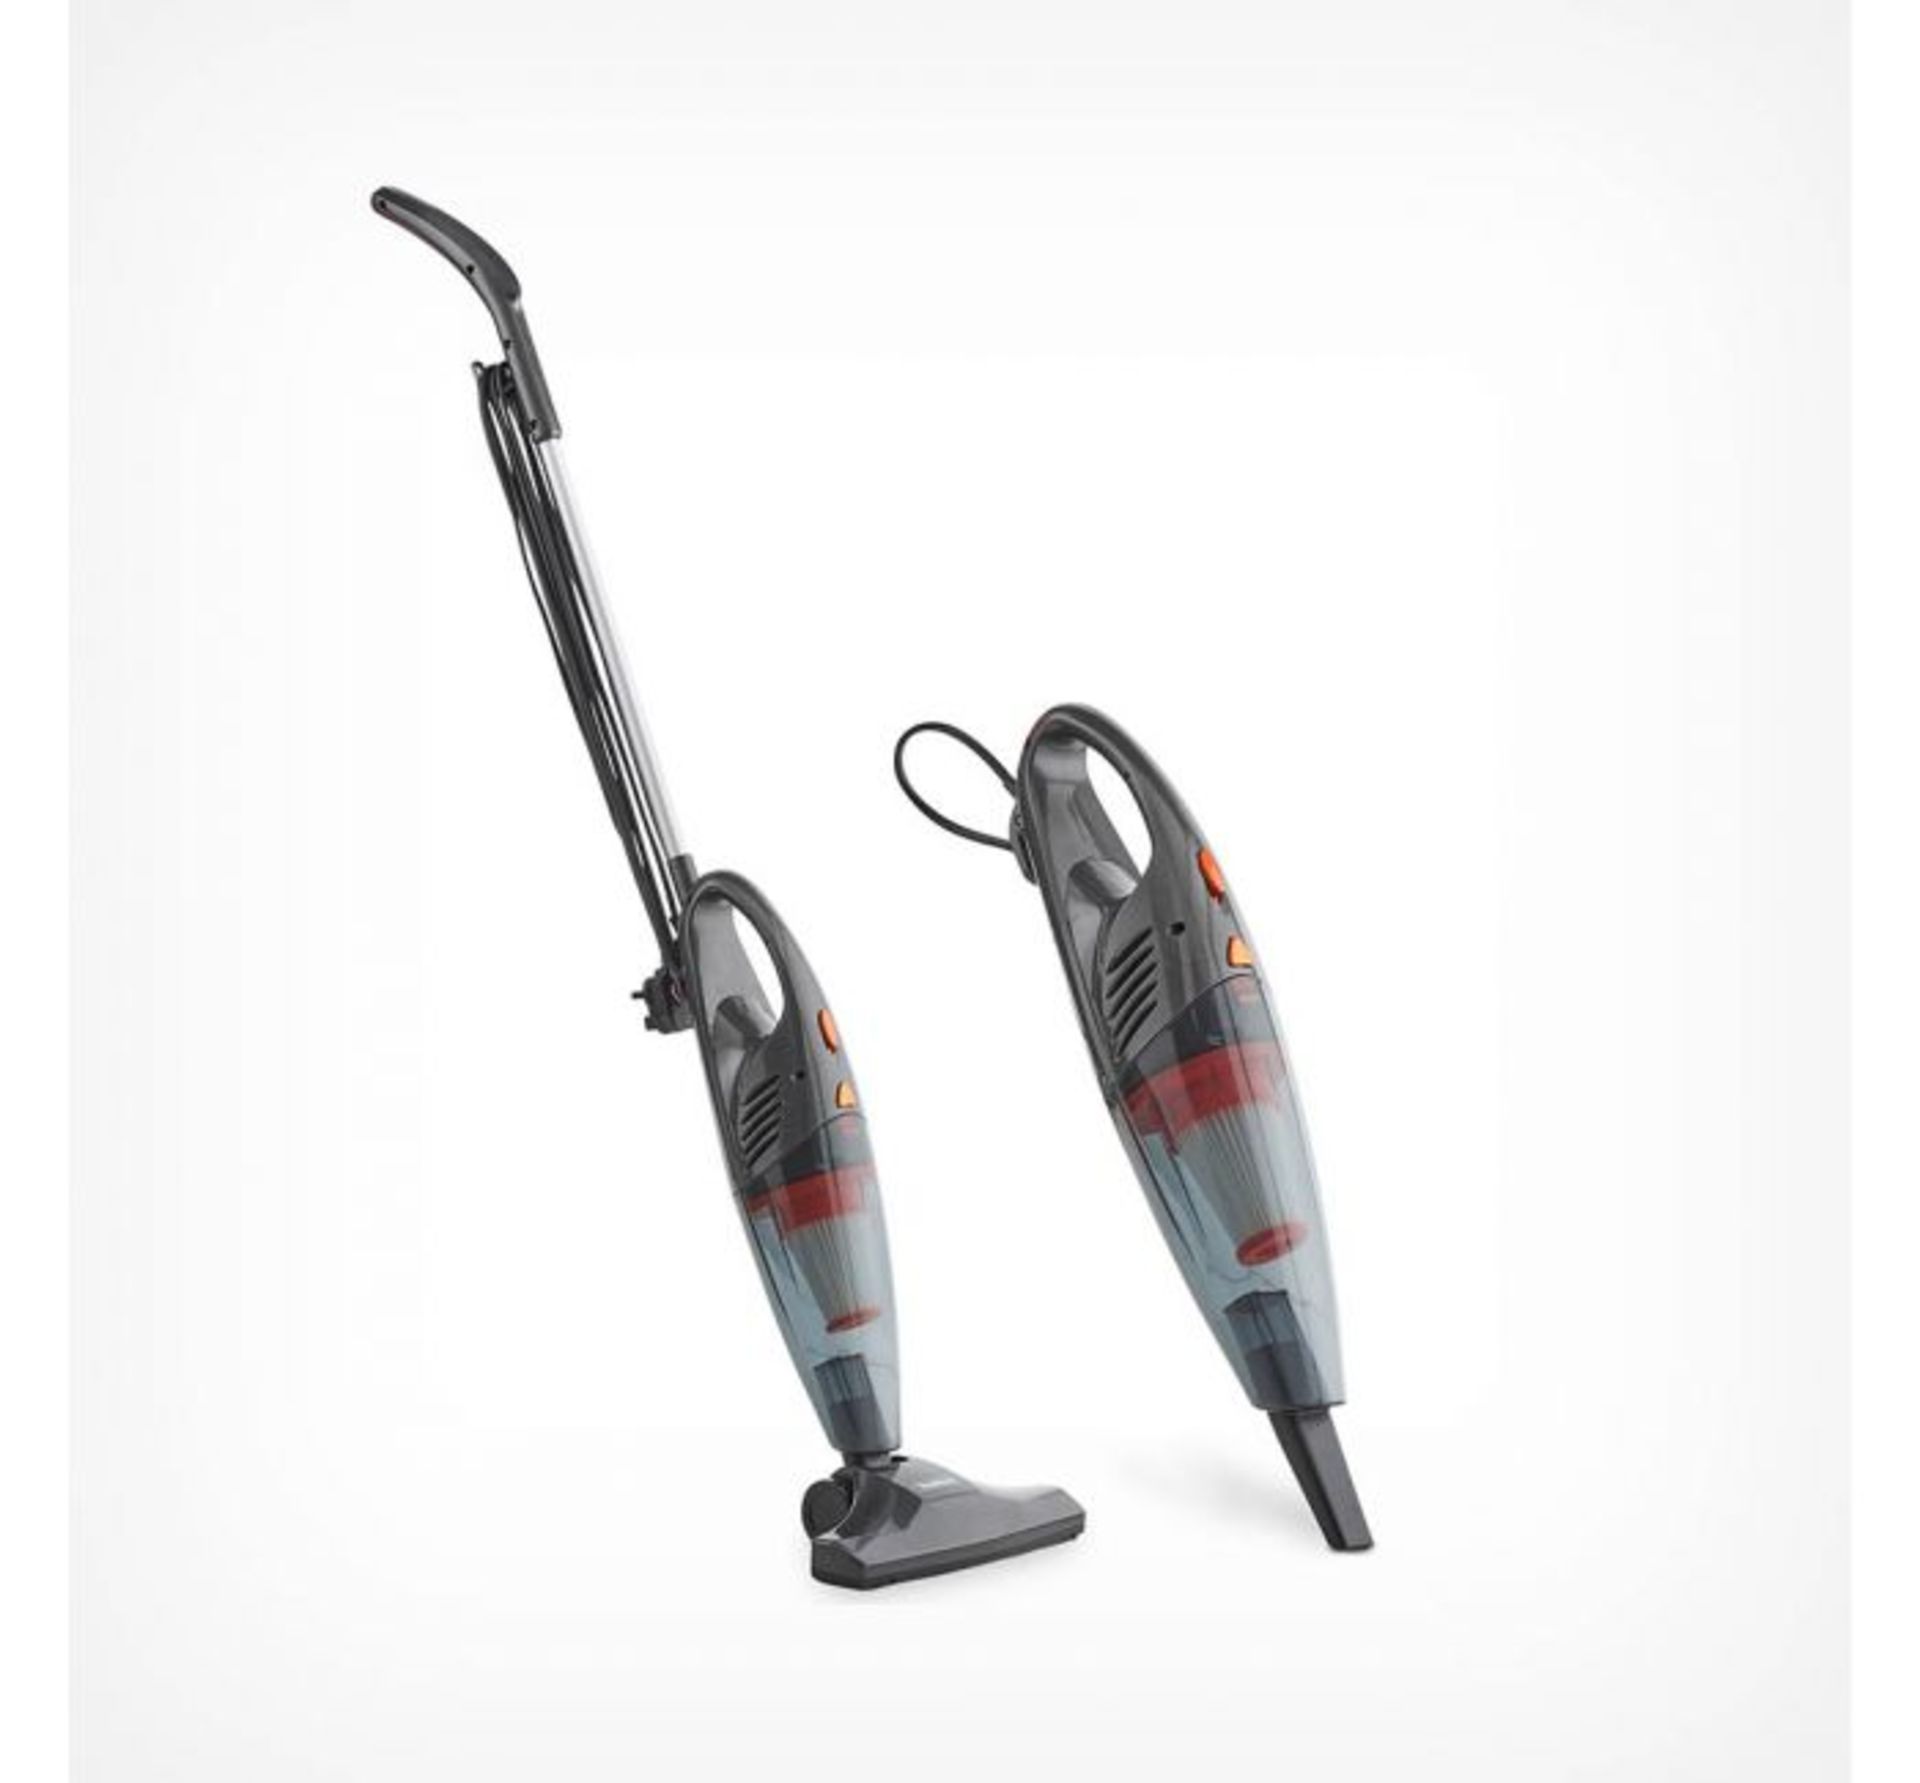 (OM17) 2 in 1 Stick Vacuum 600W - Grey Easily switch between upright and handheld for targeted... - Image 2 of 3